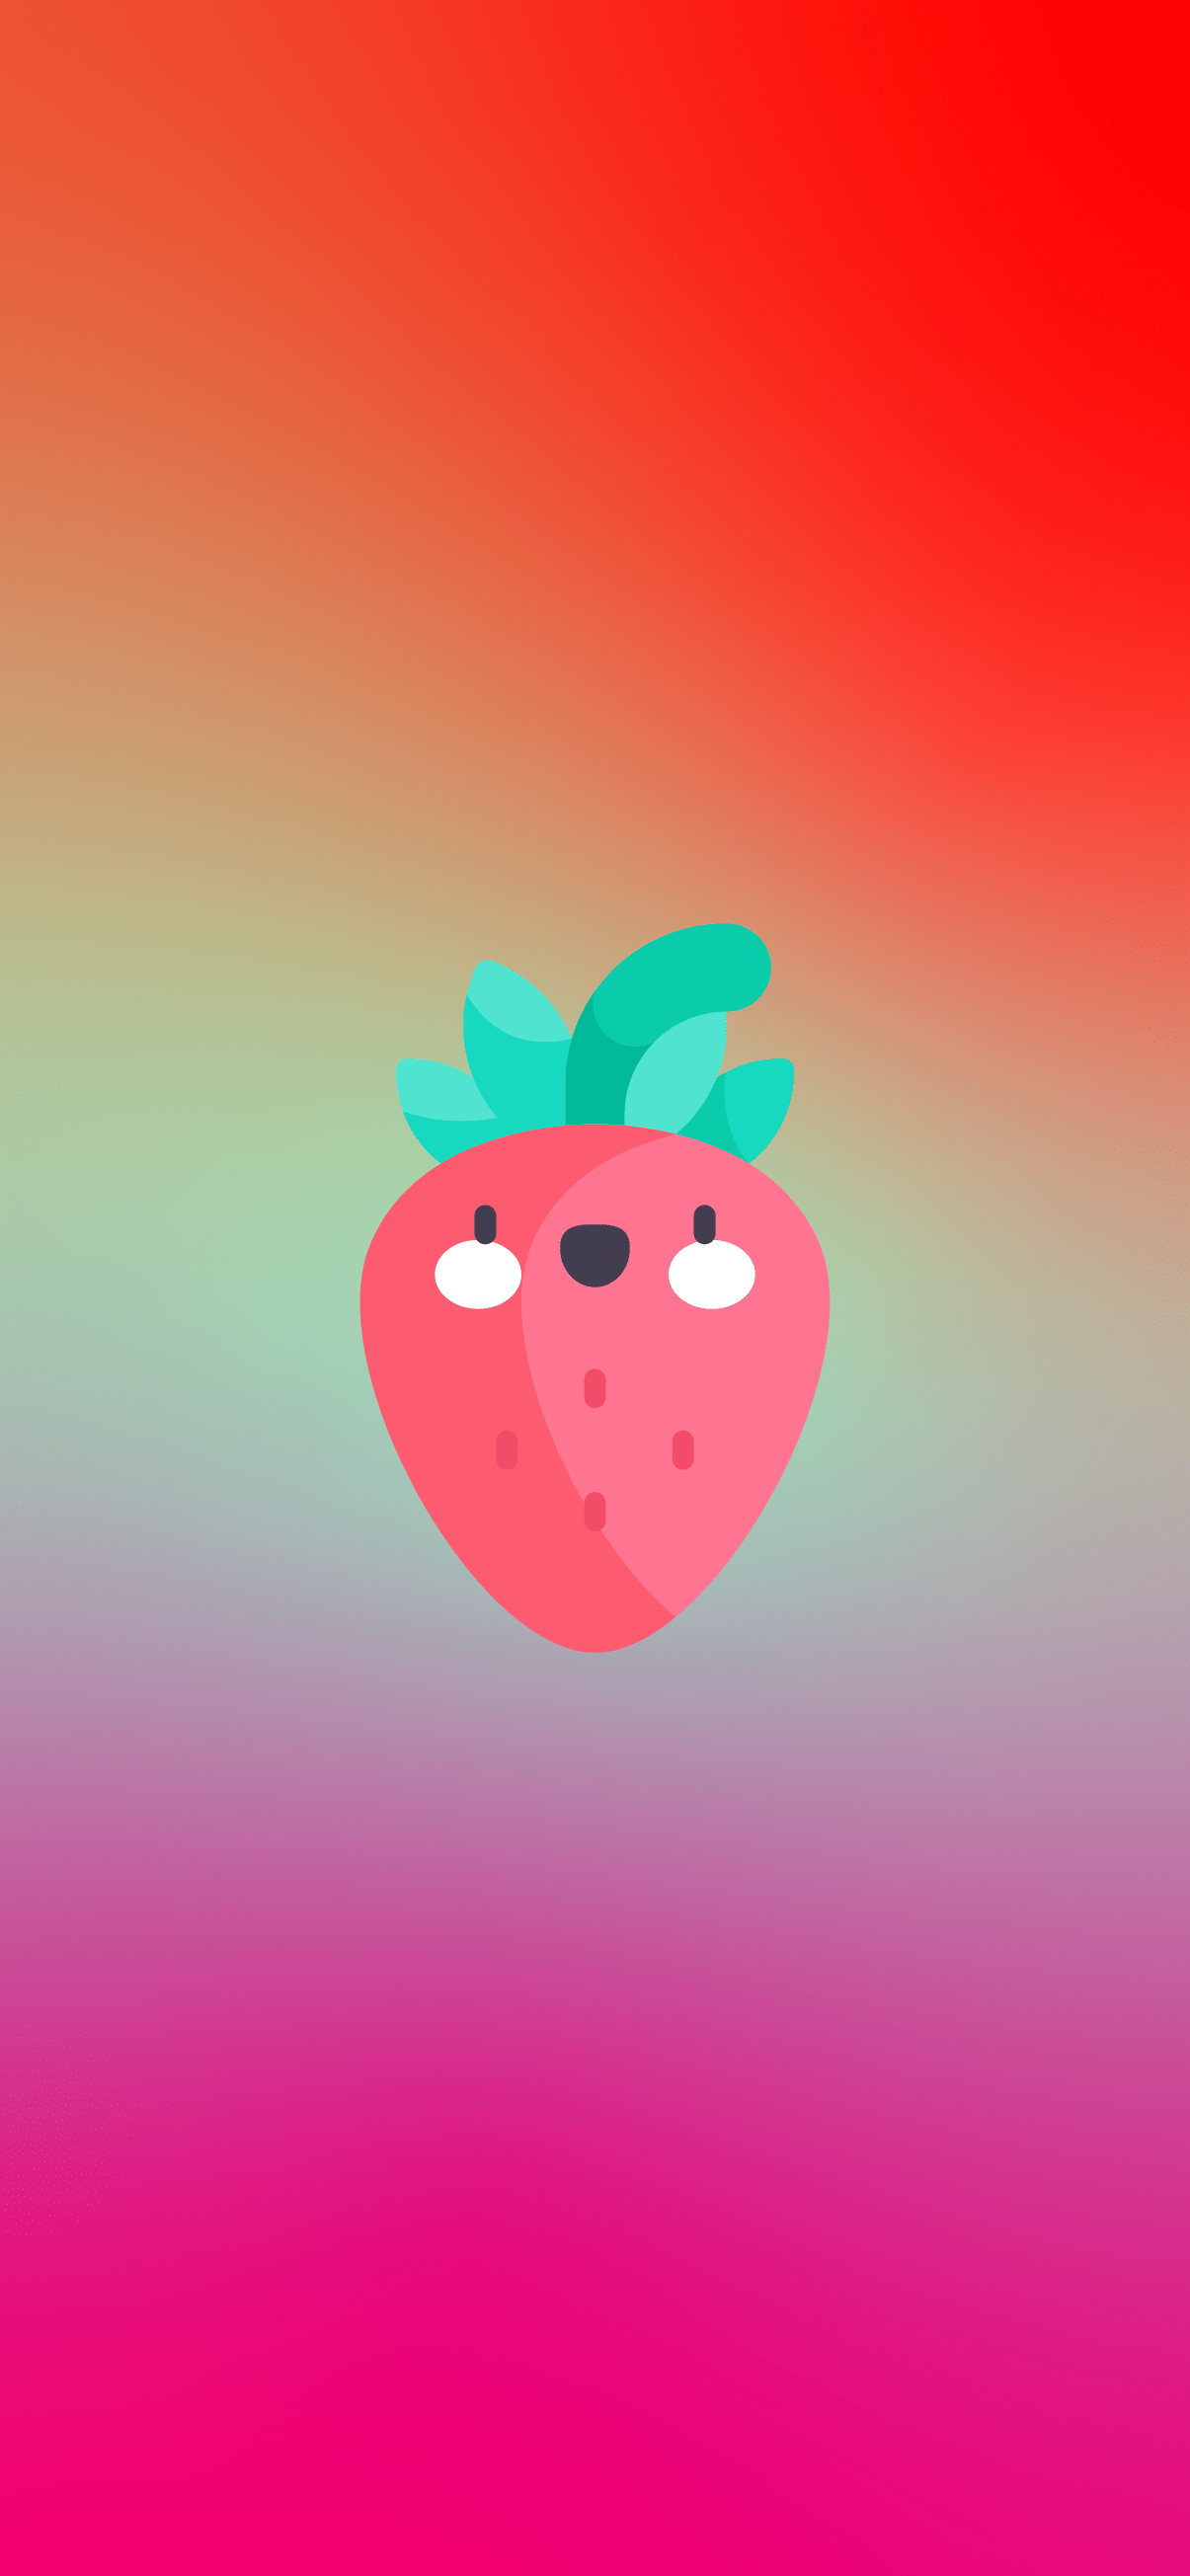 A strawberry with eyes and nose on it - Strawberry, kawaii